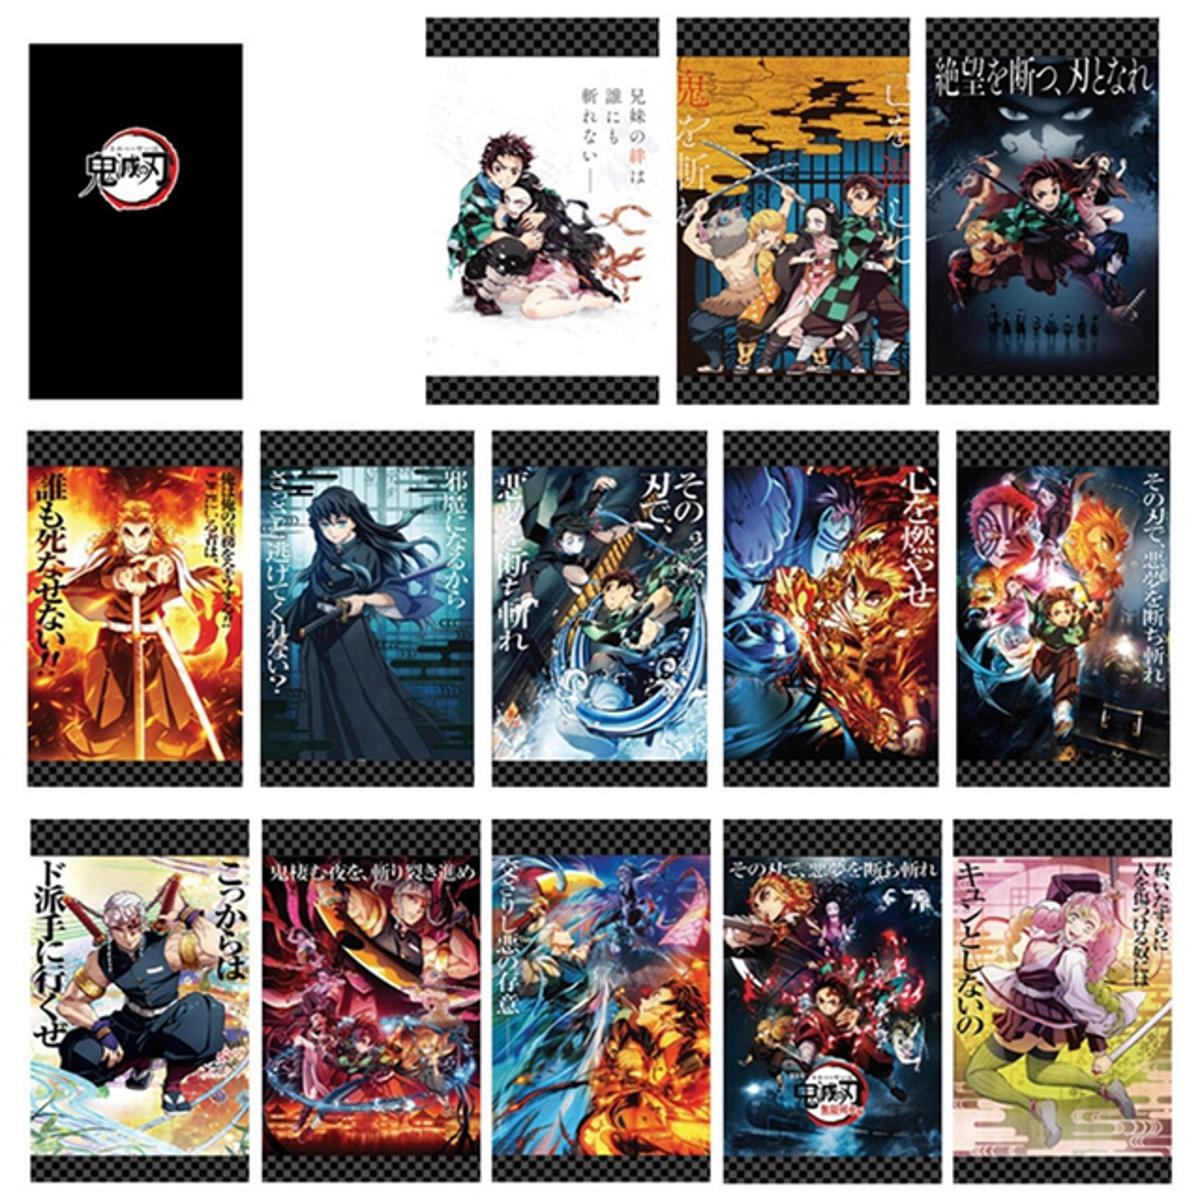 Tokyo Revengers Photocards | Tokyo Revengers Cards | Anime Photocards |  Card Stickers - Stationery Set - Aliexpress